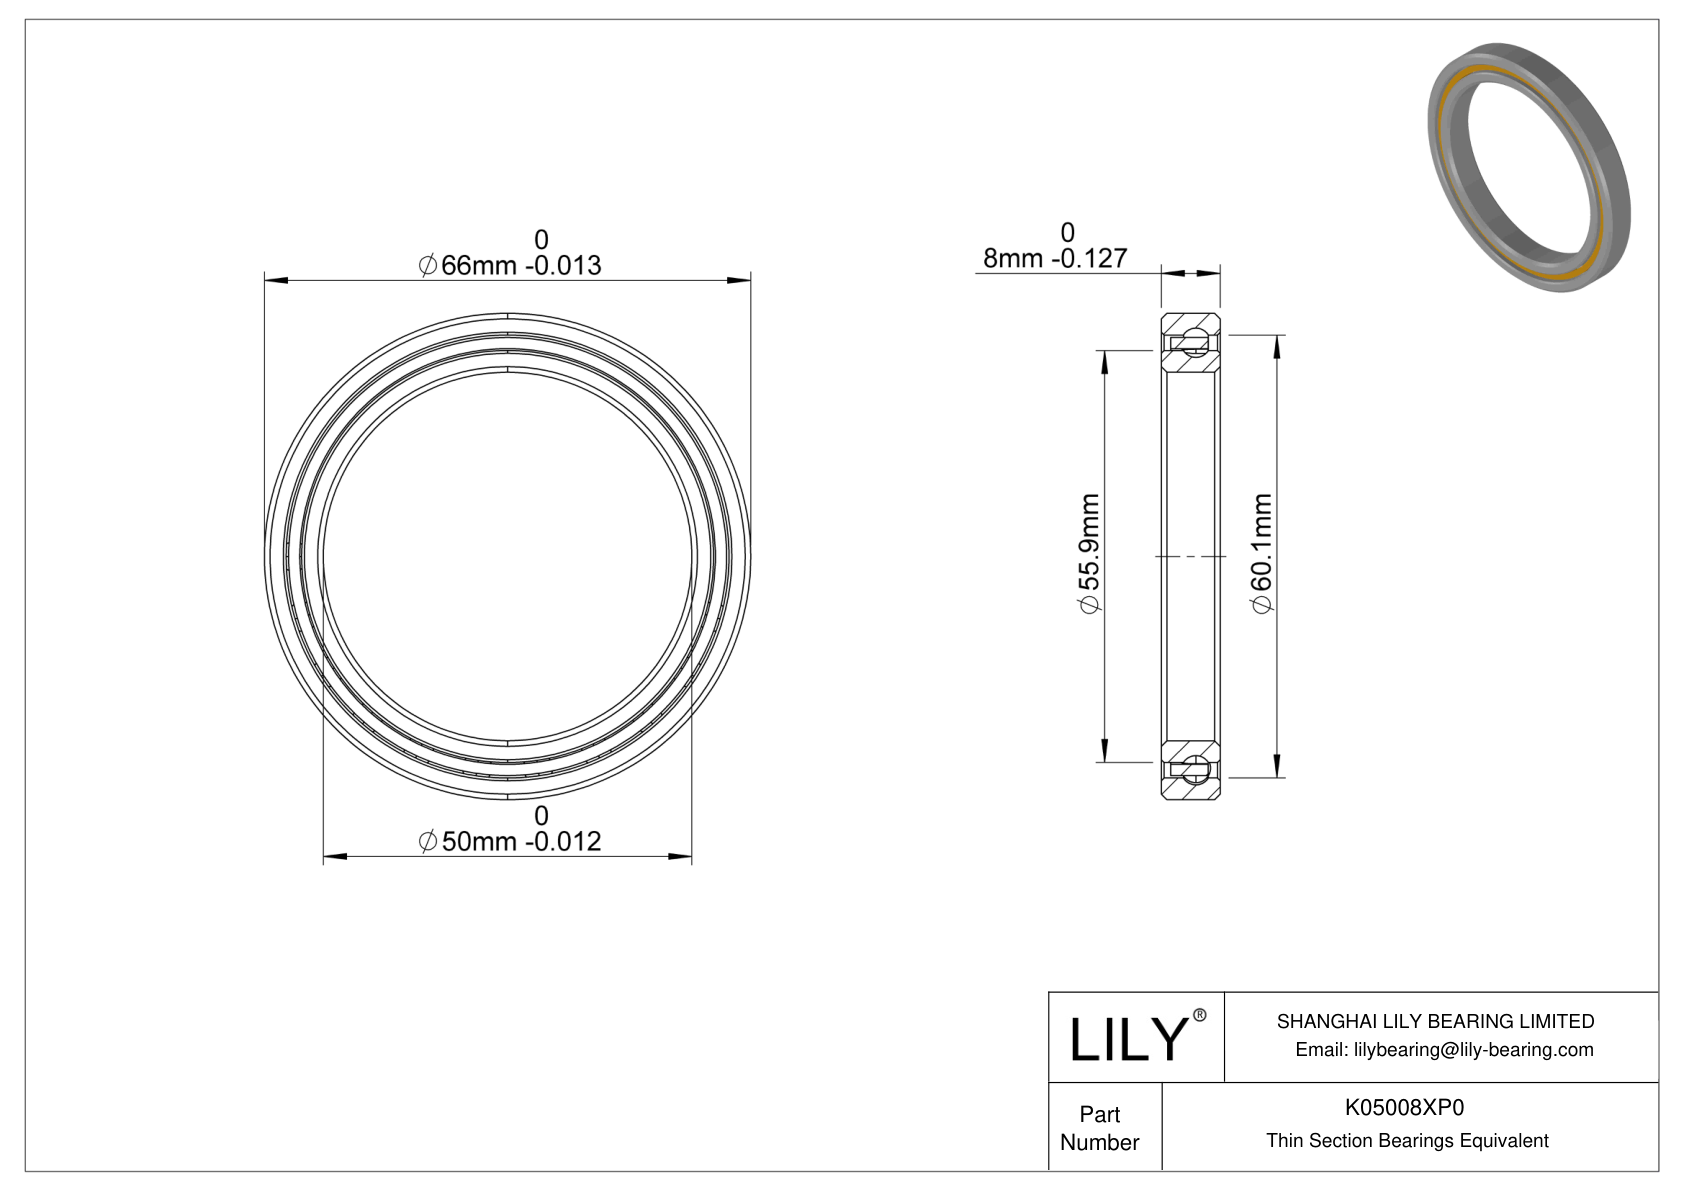 K05008XP0 Constant Section (CS) Bearings cad drawing